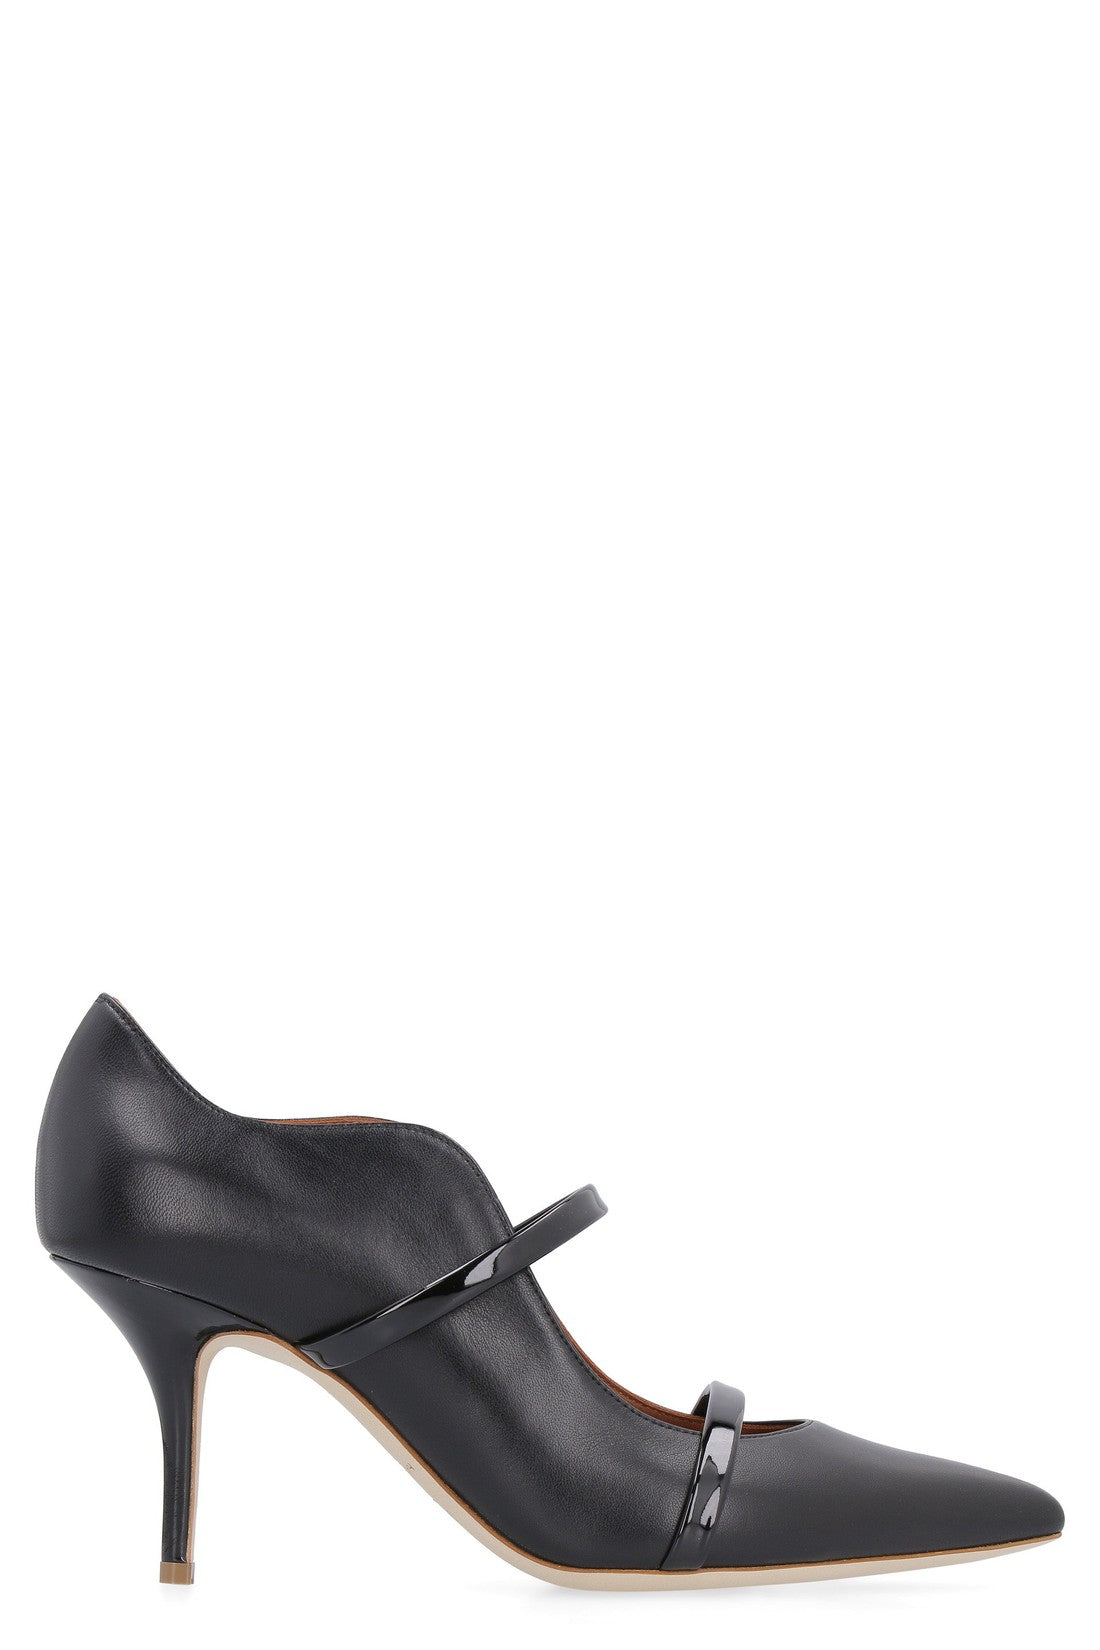 Malone Souliers-OUTLET-SALE-Maureen leather pointy-toe pumps-ARCHIVIST